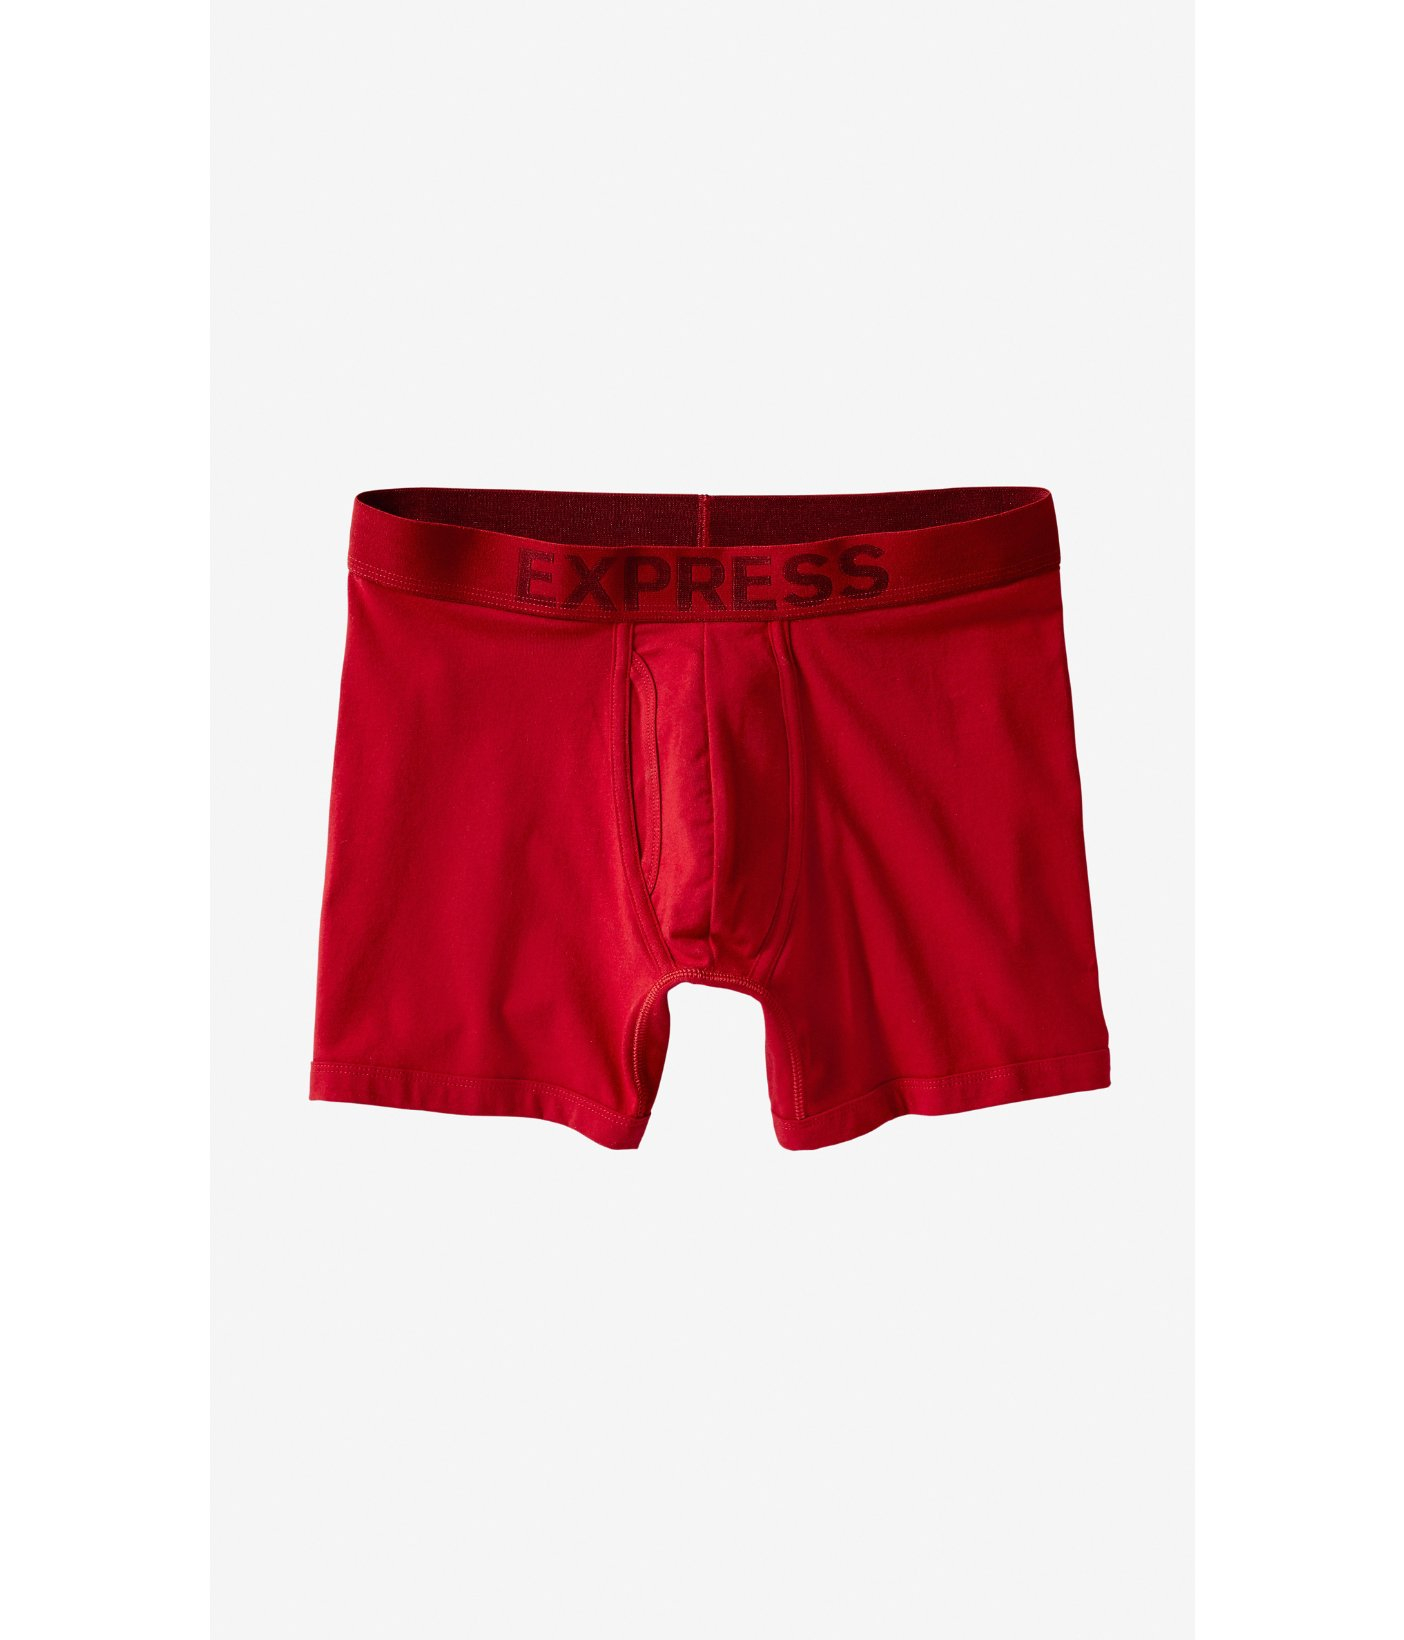 Lyst - Express Knit Boxer Briefs in Red for Men